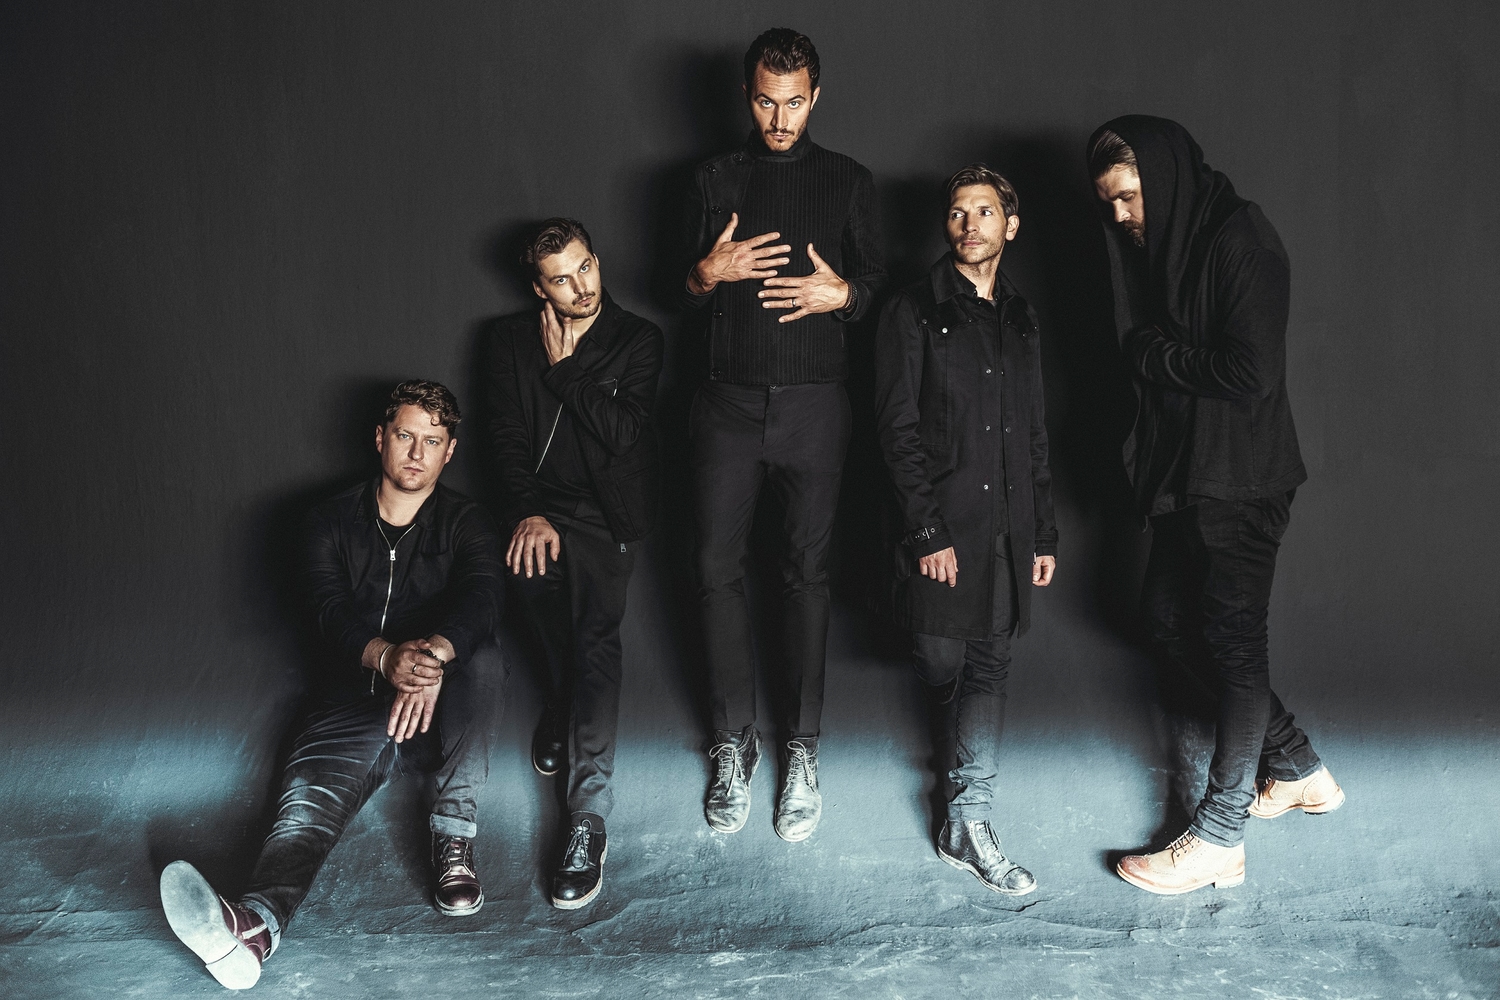 Editors unveil new single ‘Frankenstein’, a “cartoon song for the freaks”